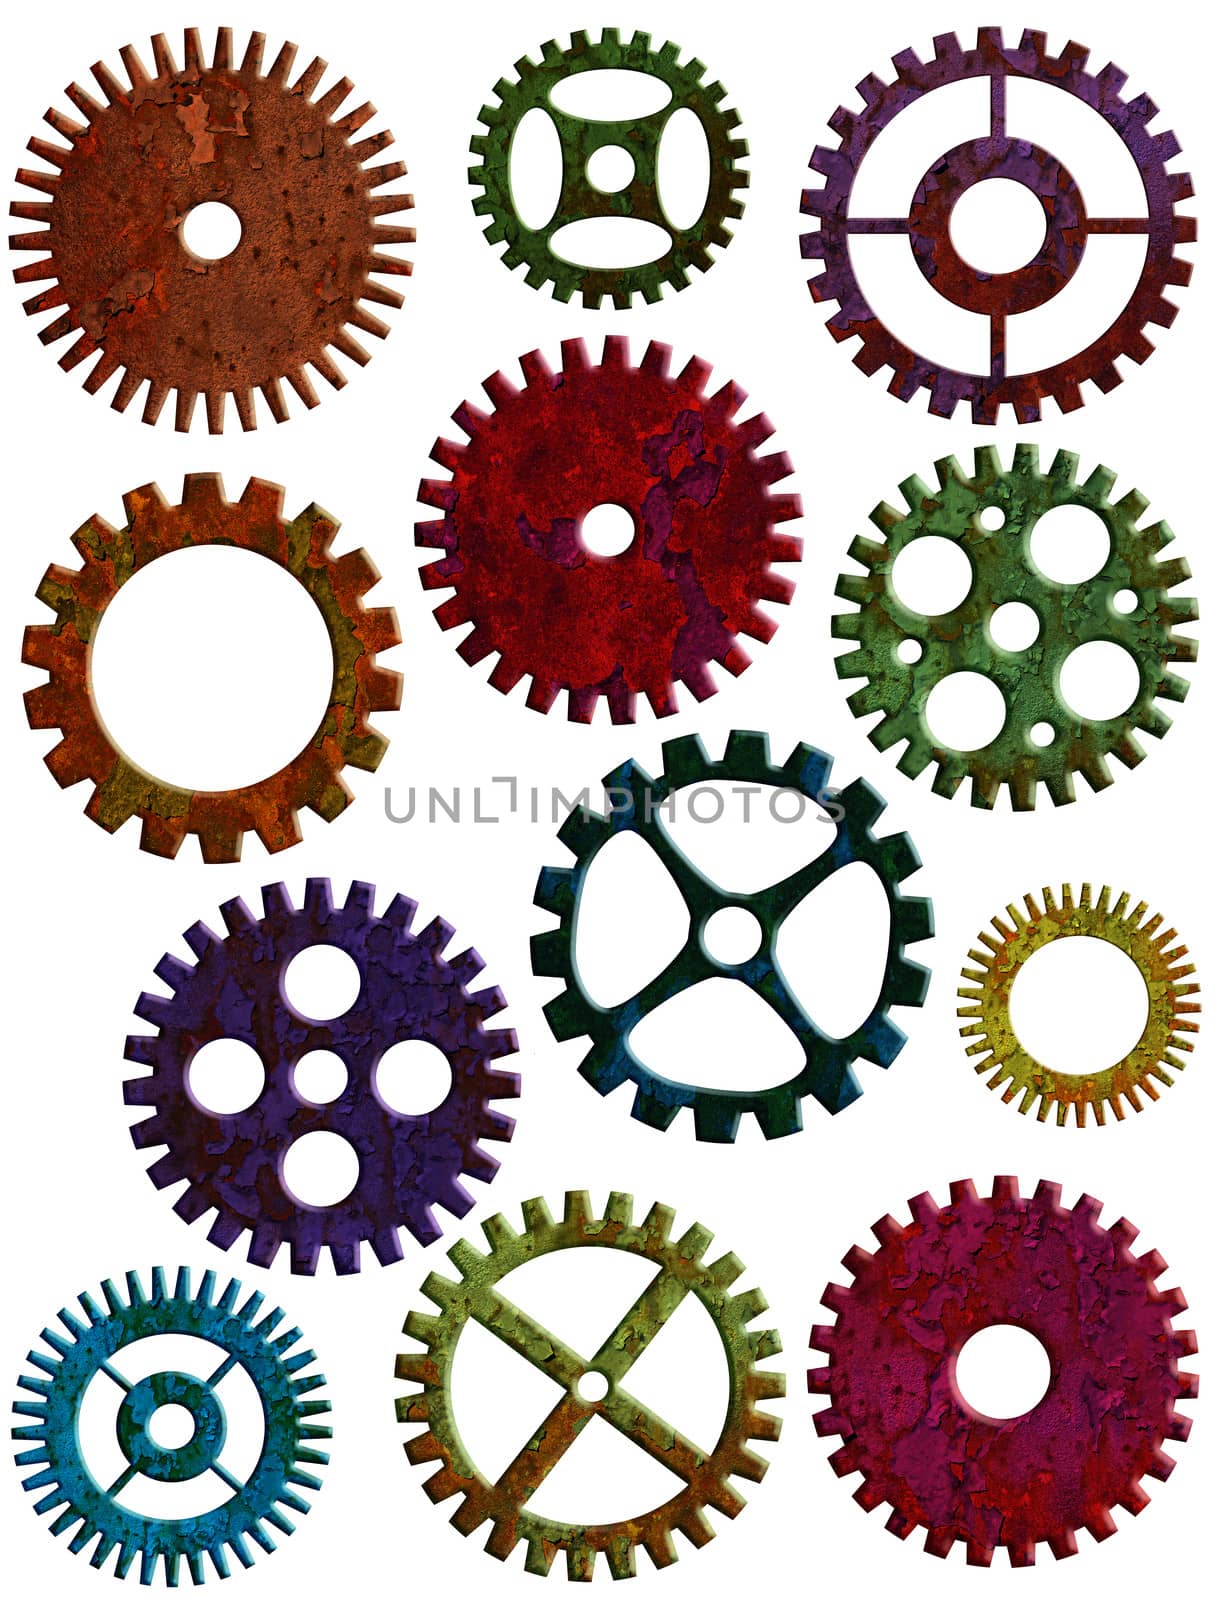 Rusty Mechanical Gears or Pulleys of Various Colors Shapes and Sizes Illustration Isolated on White Background